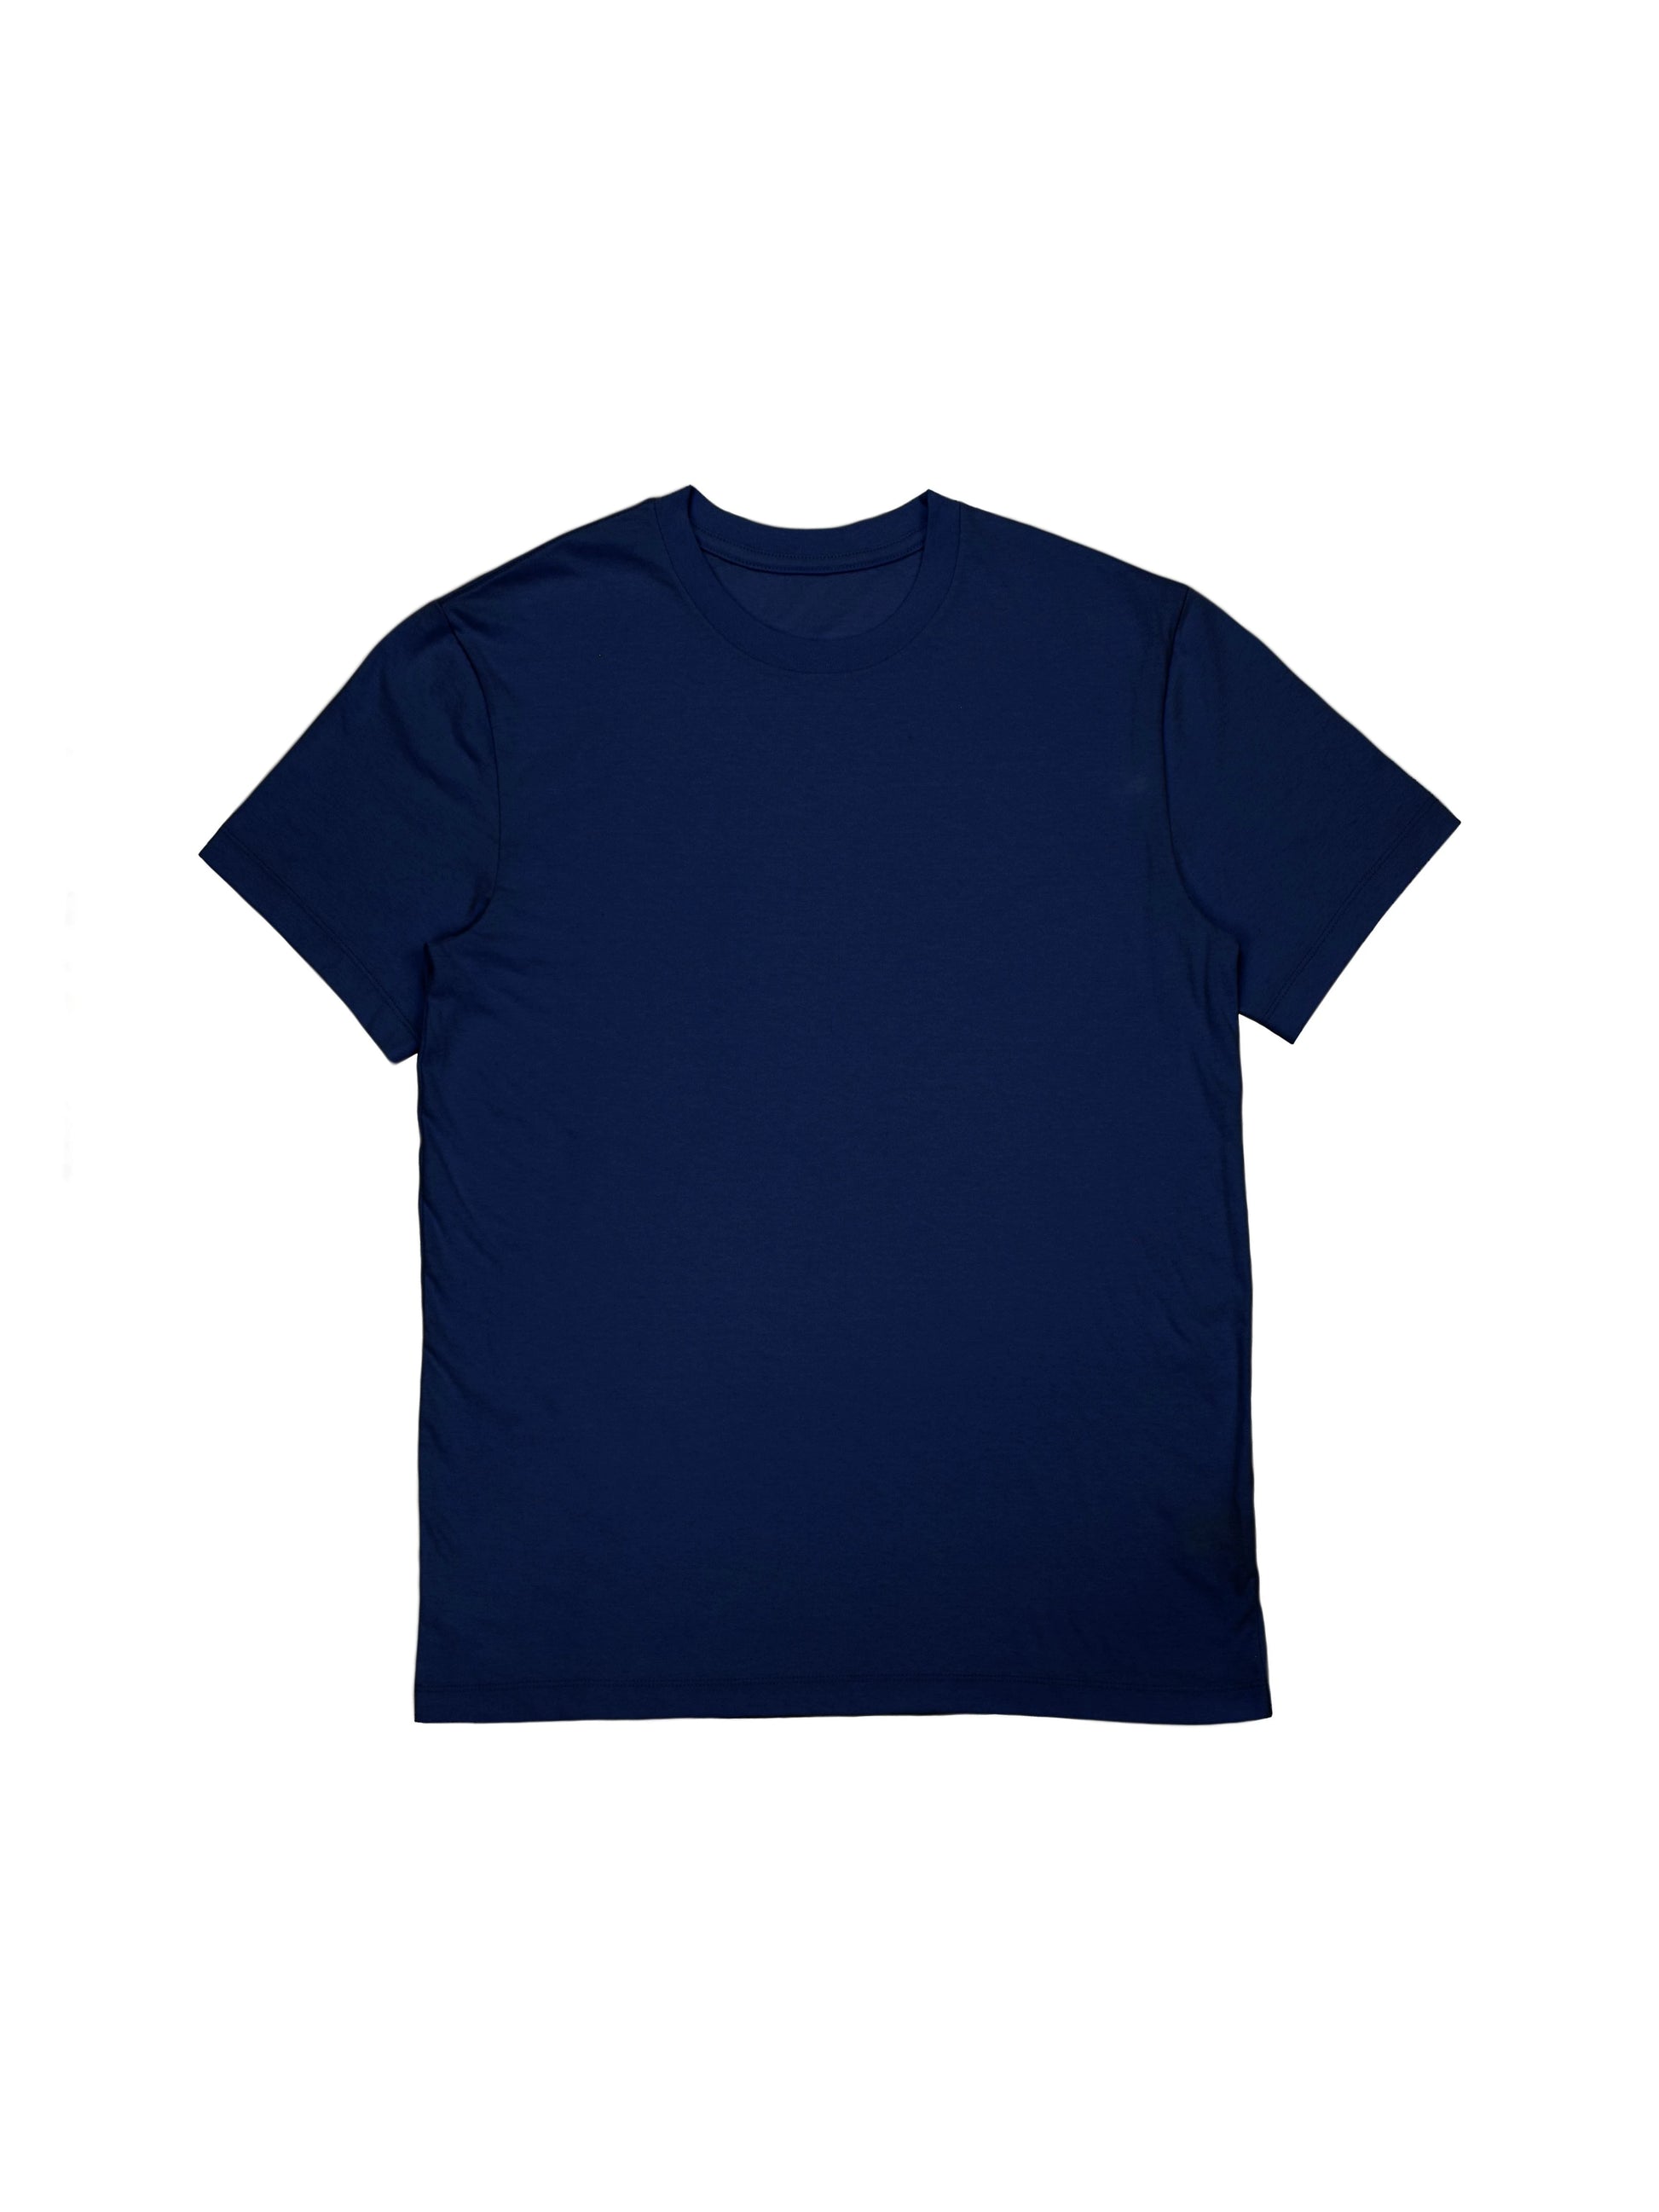 Navy Blue T-Shirt in Trendy Boxy Fit.